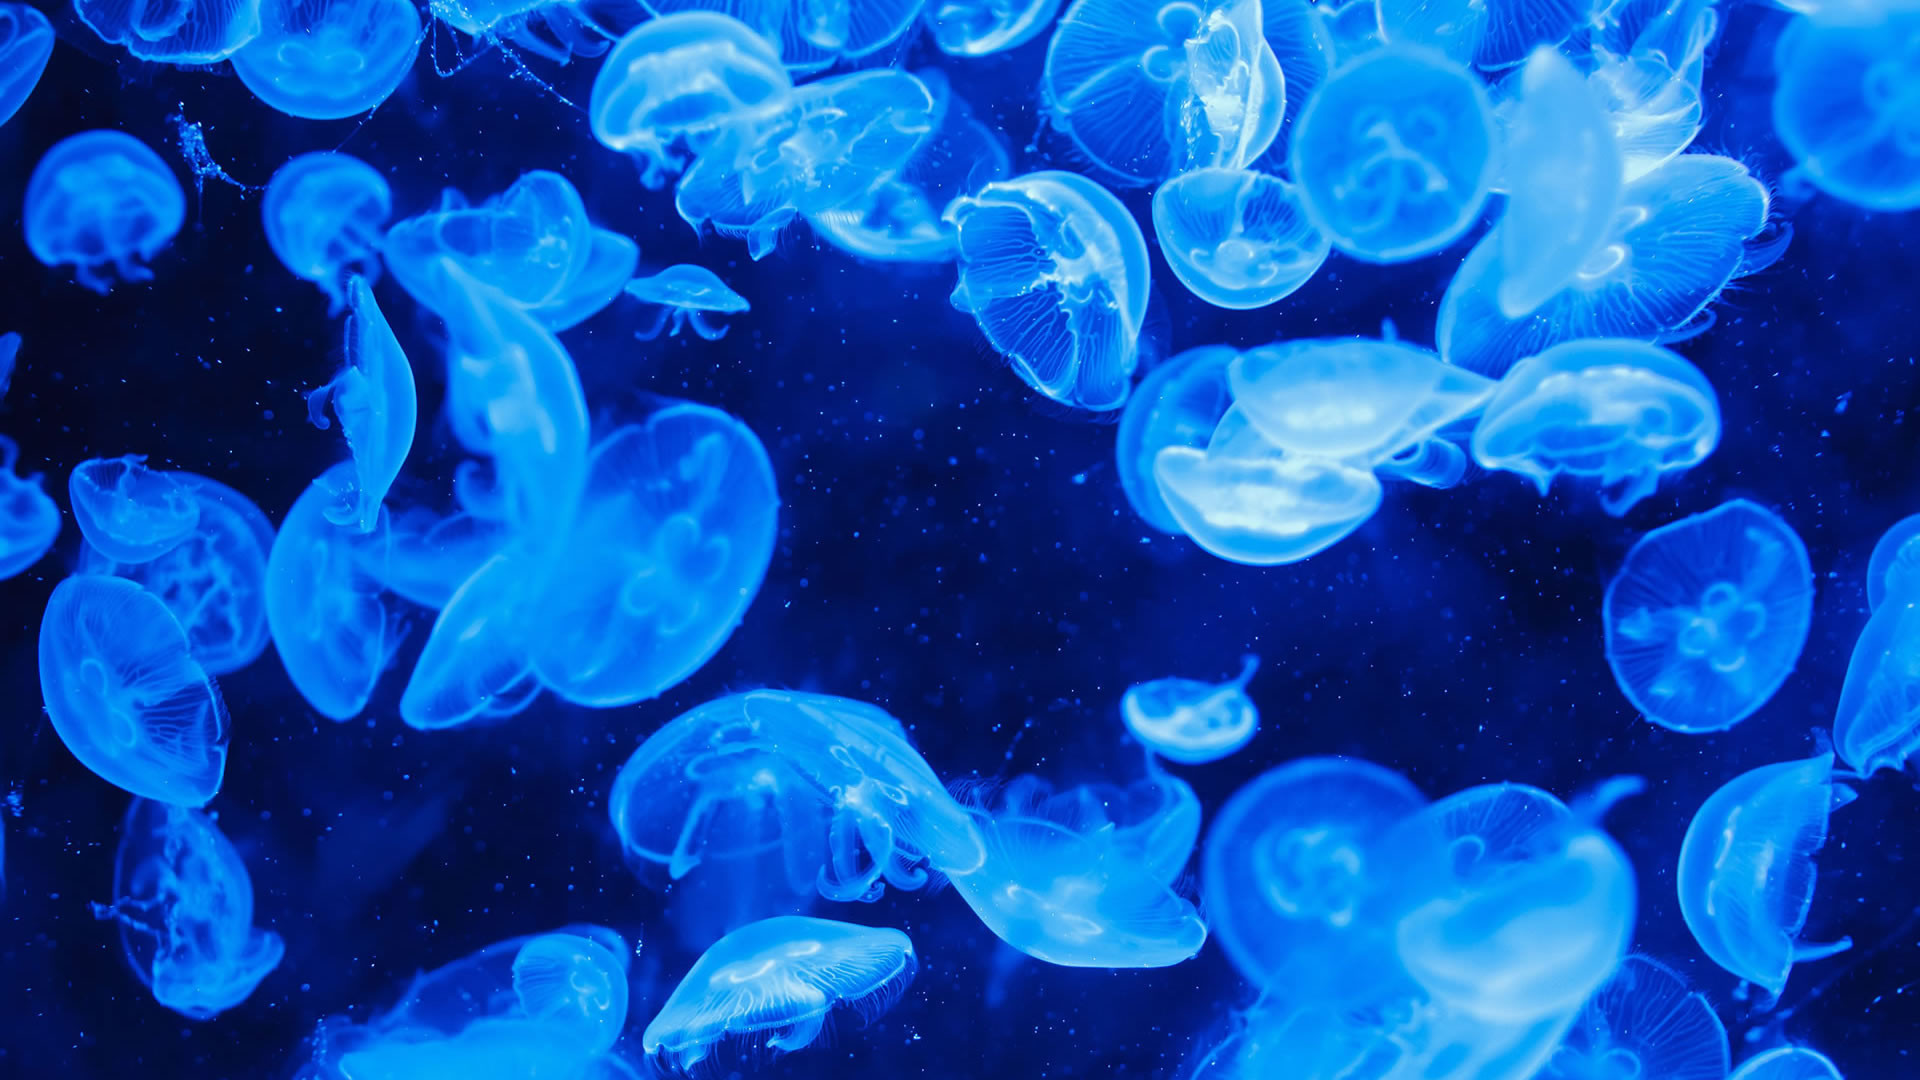 1920x1080 Awesome Jellyfish Wallpaper 45570